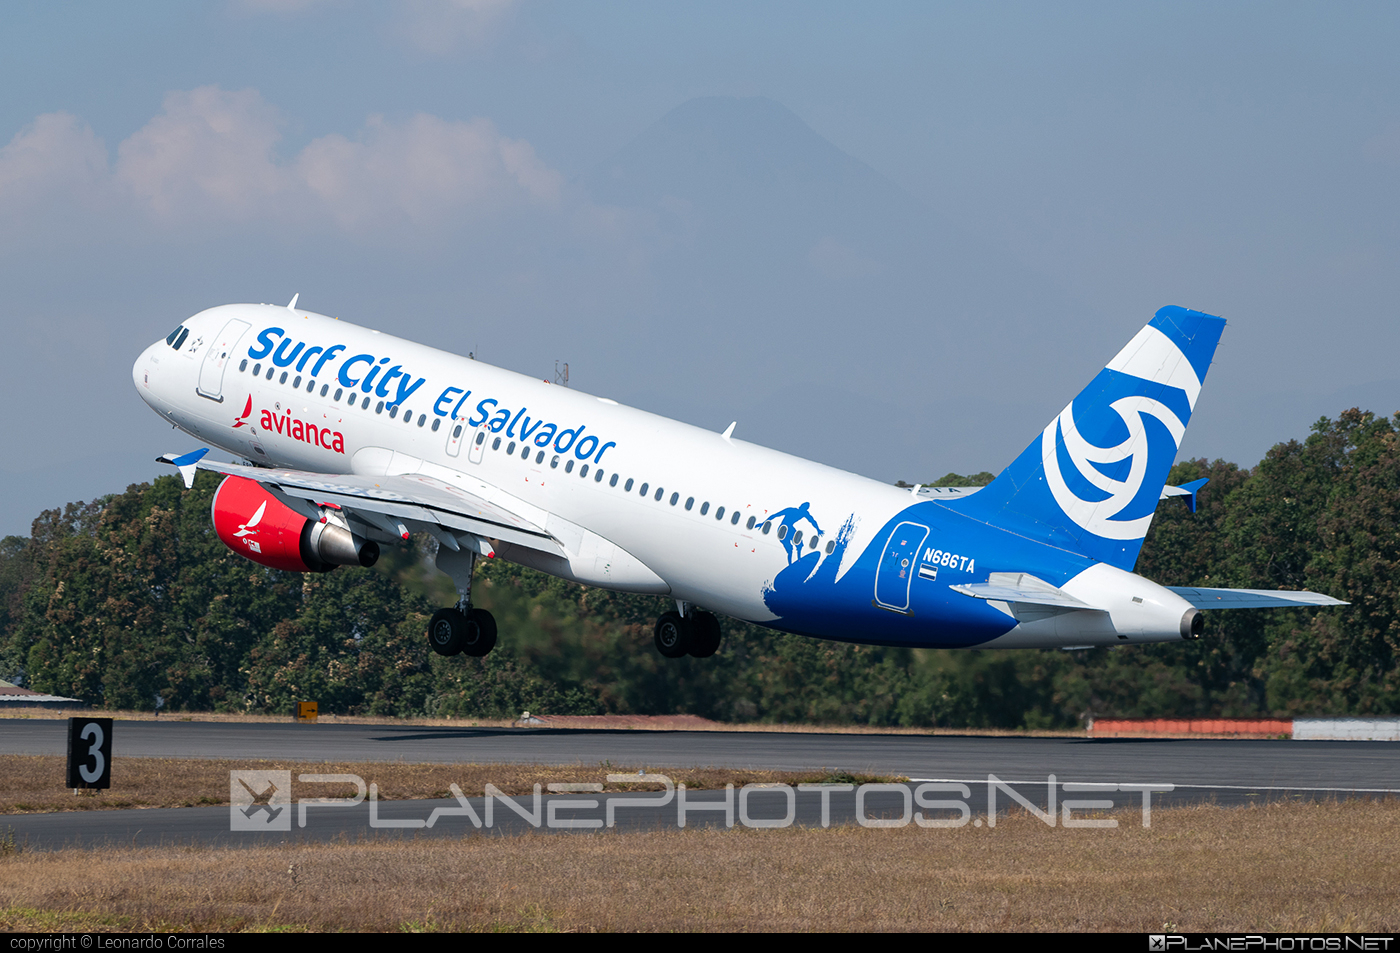 Airbus A320-214 - N686TA operated by Avianca El Salvador #AviancaElSalvador #a320 #a320family #airbus #airbus320 #avianca